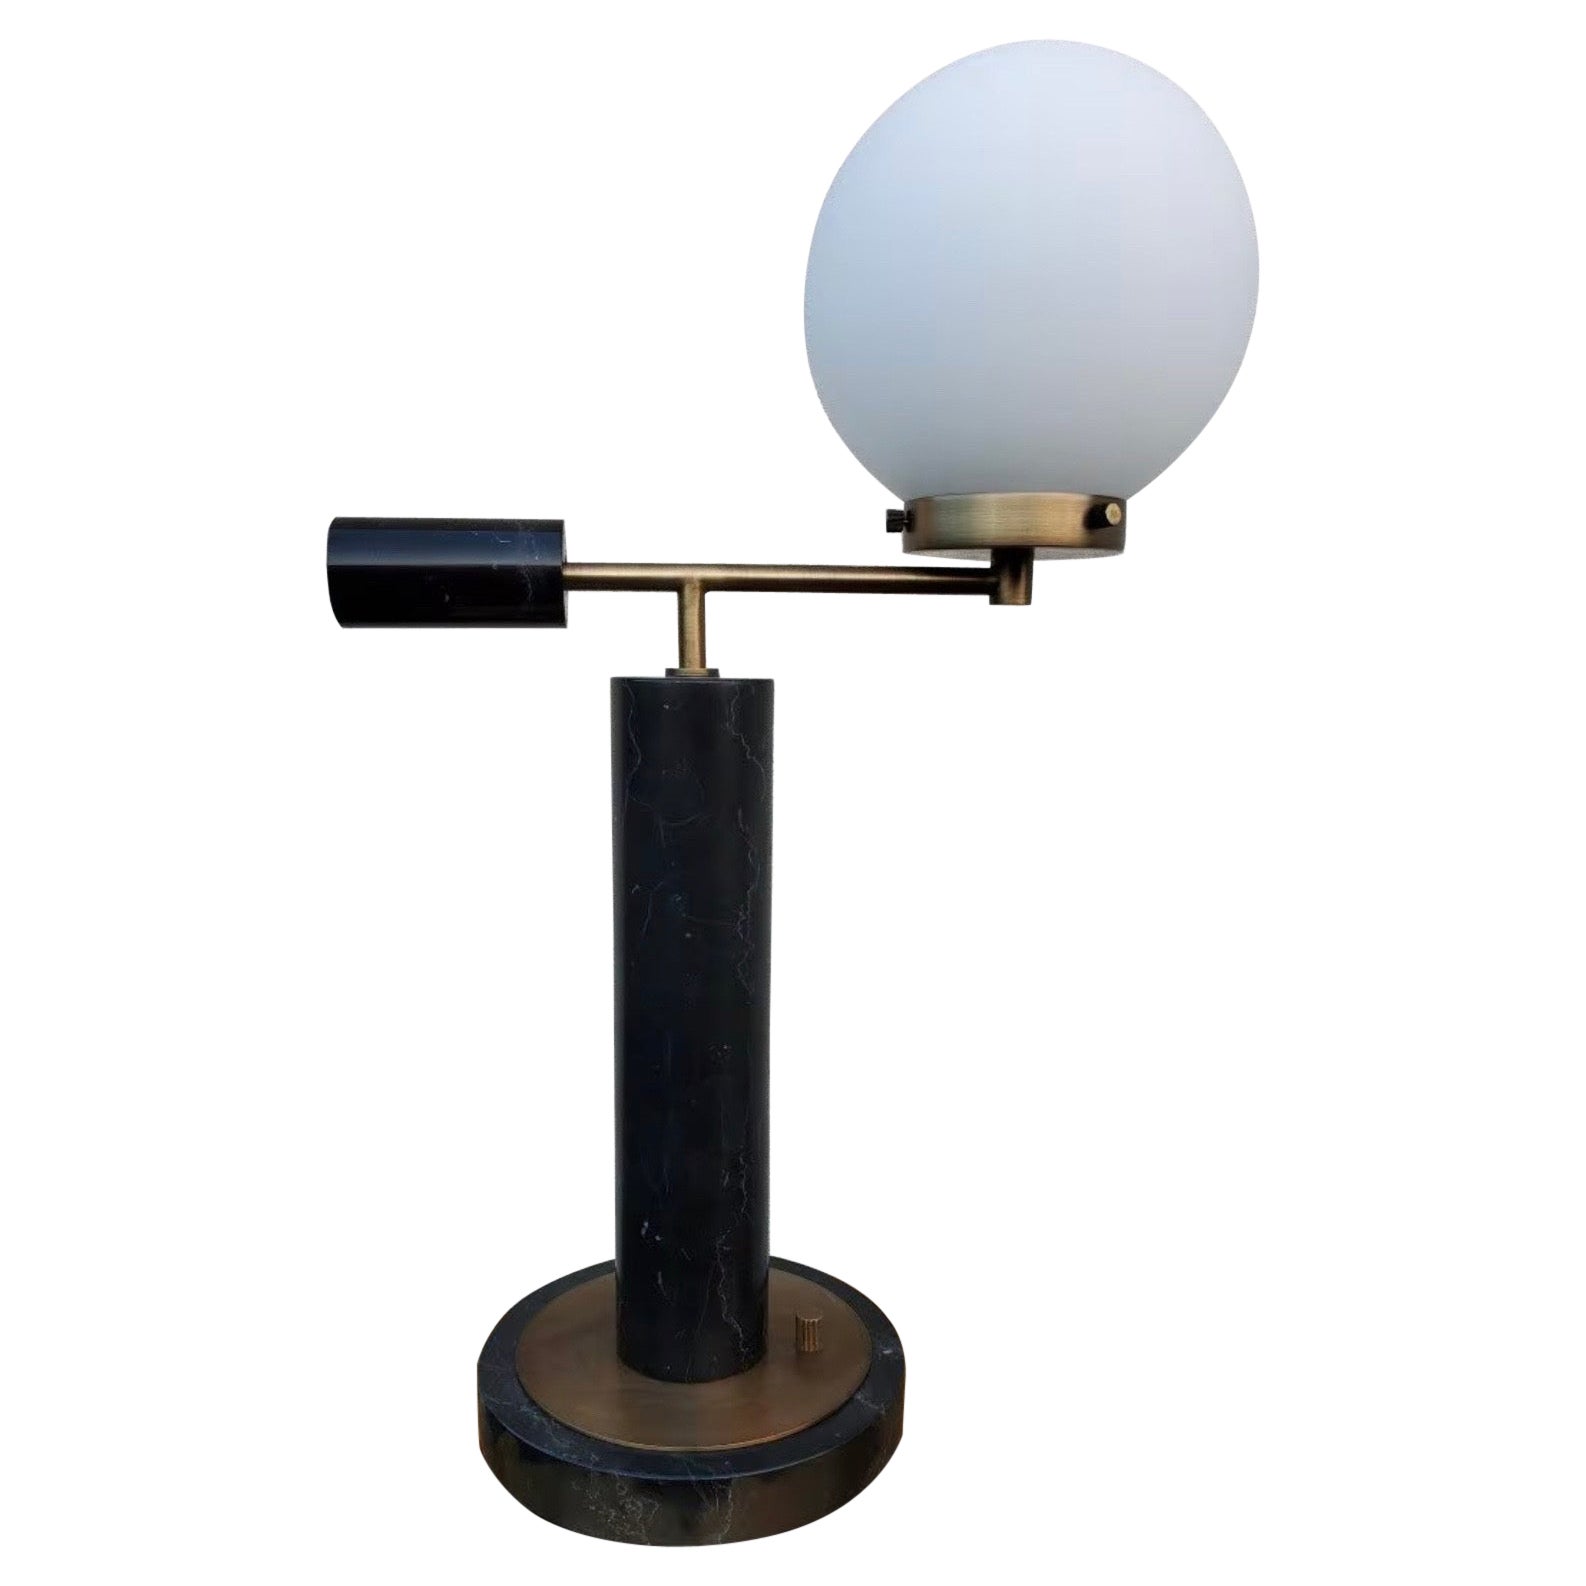 Modern Marble and Brass Table Lamps with White Ball Shade